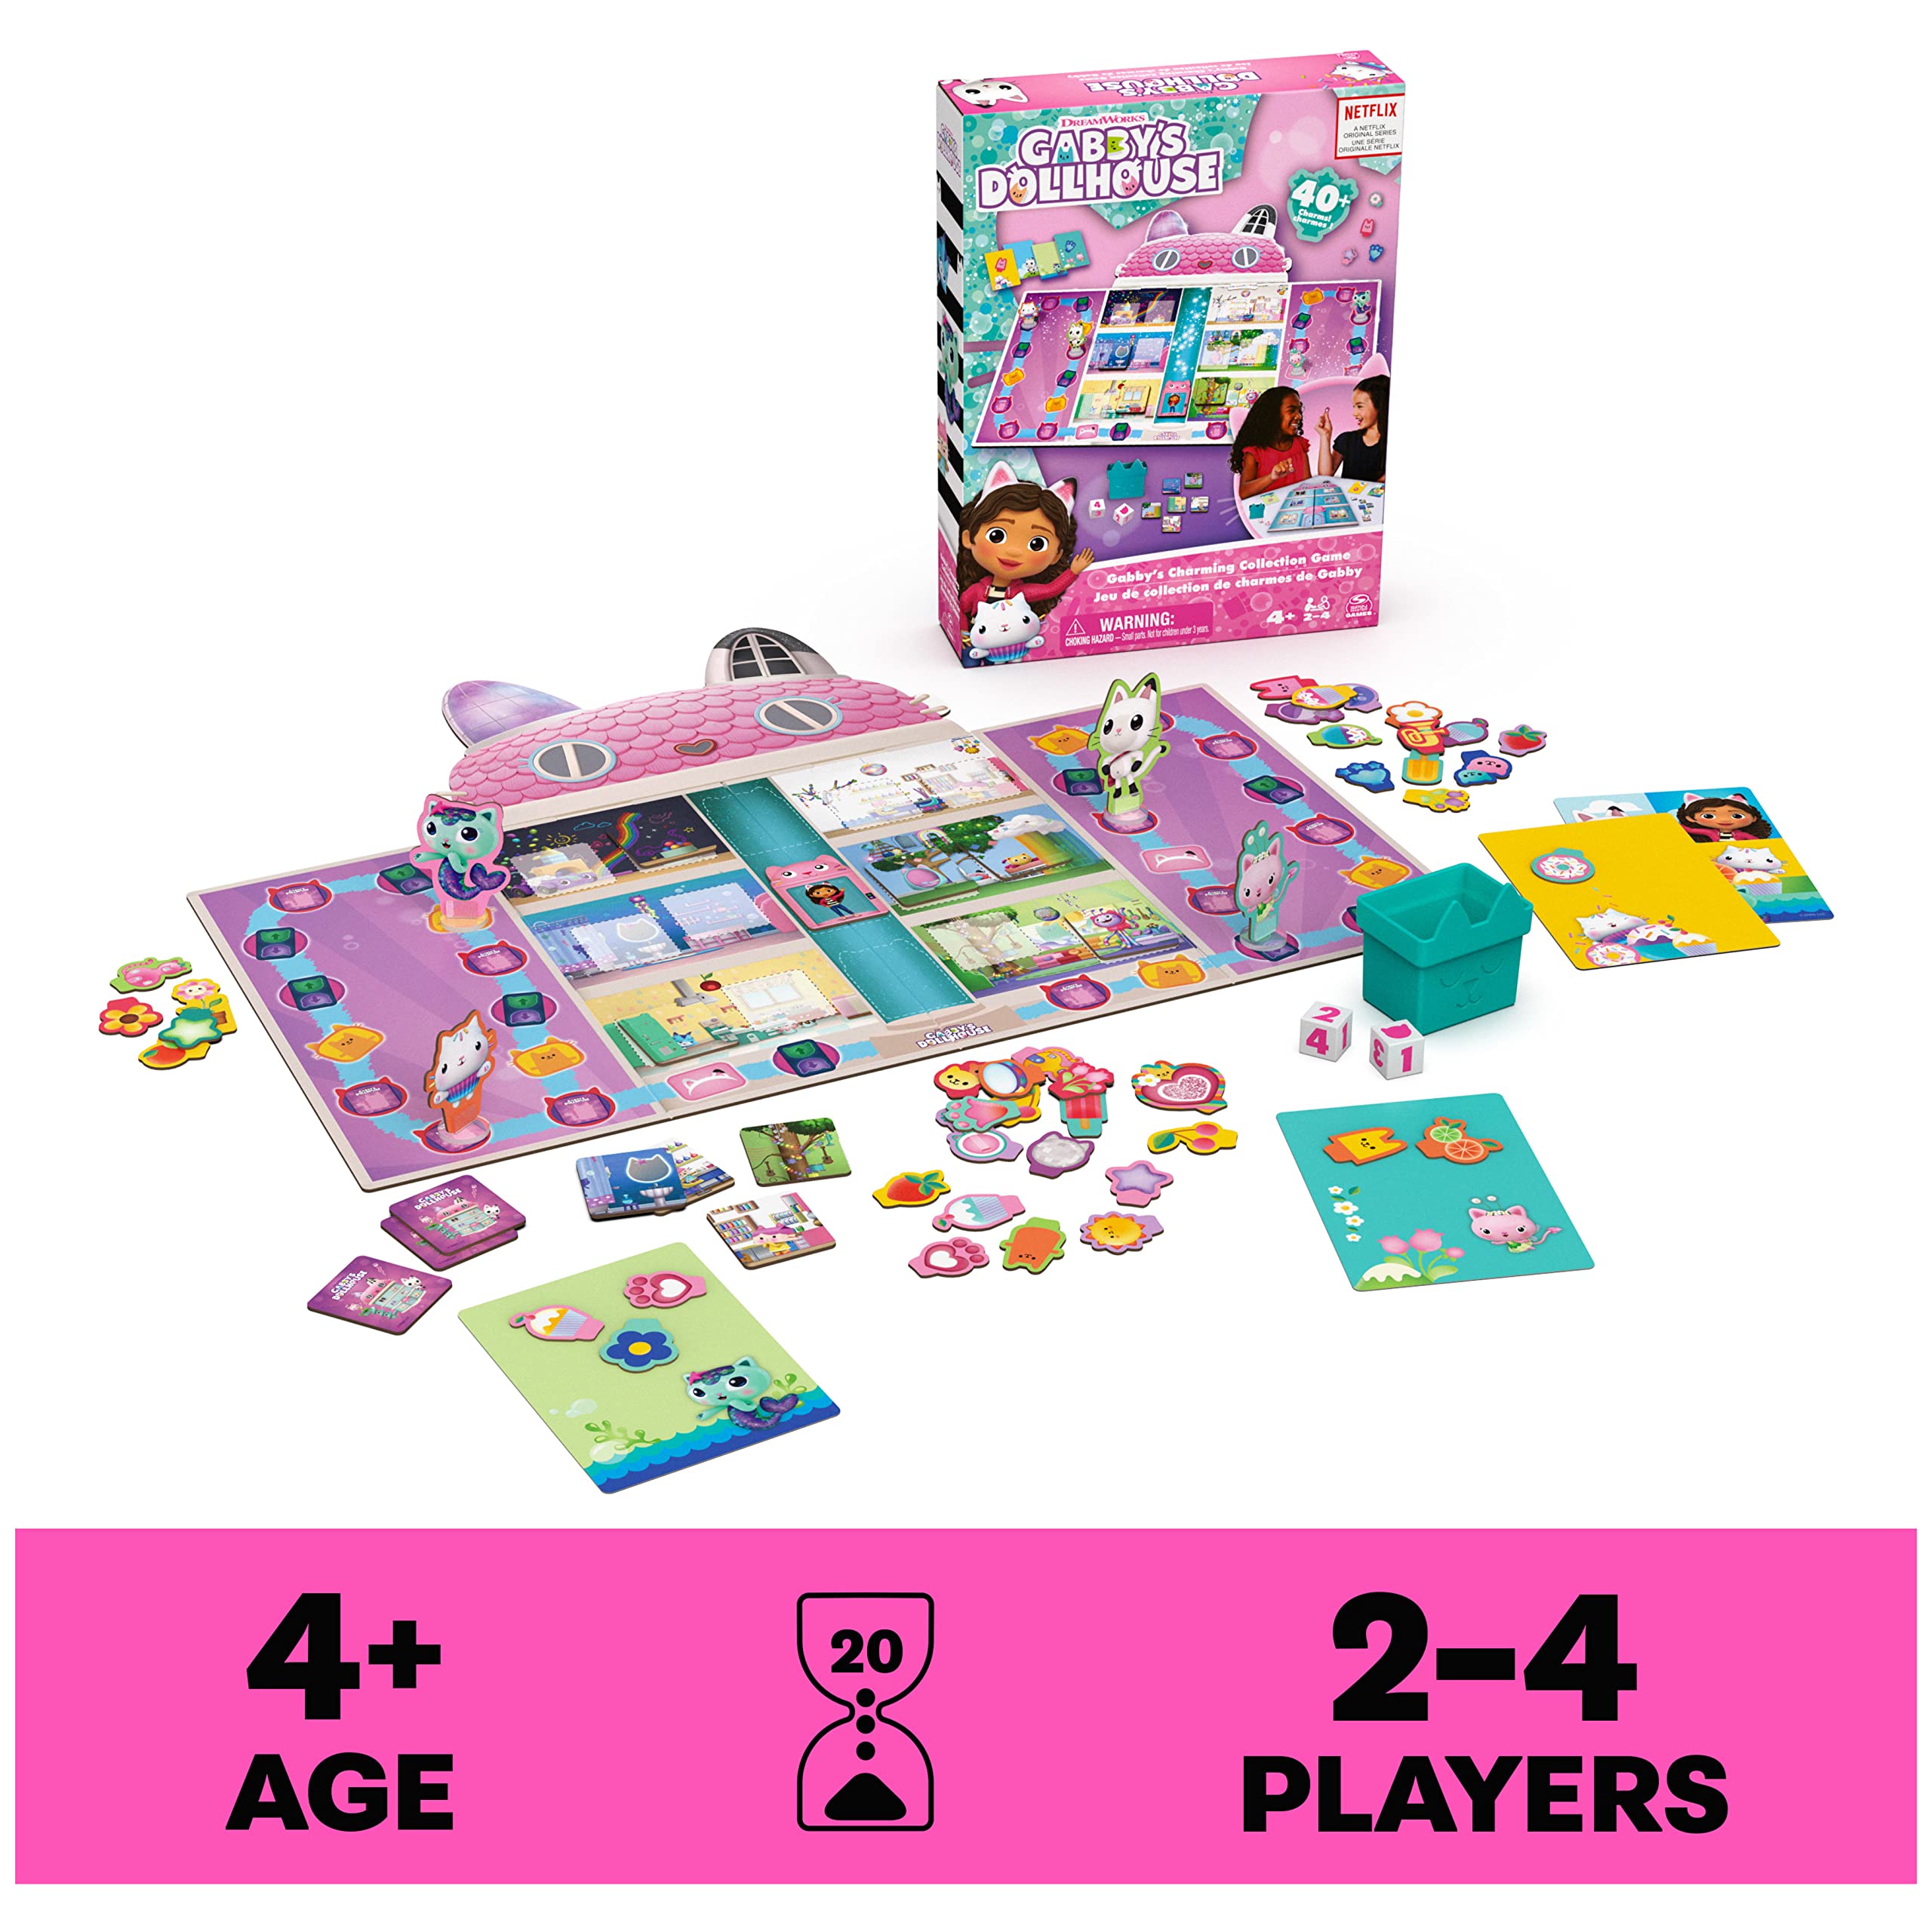 Gabby’s Dollhouse, Charming Collection Game Board Game for Kids Based on The Netflix Original Series Gabby’s Dollhouse Toys, for Kids Ages 4 and up